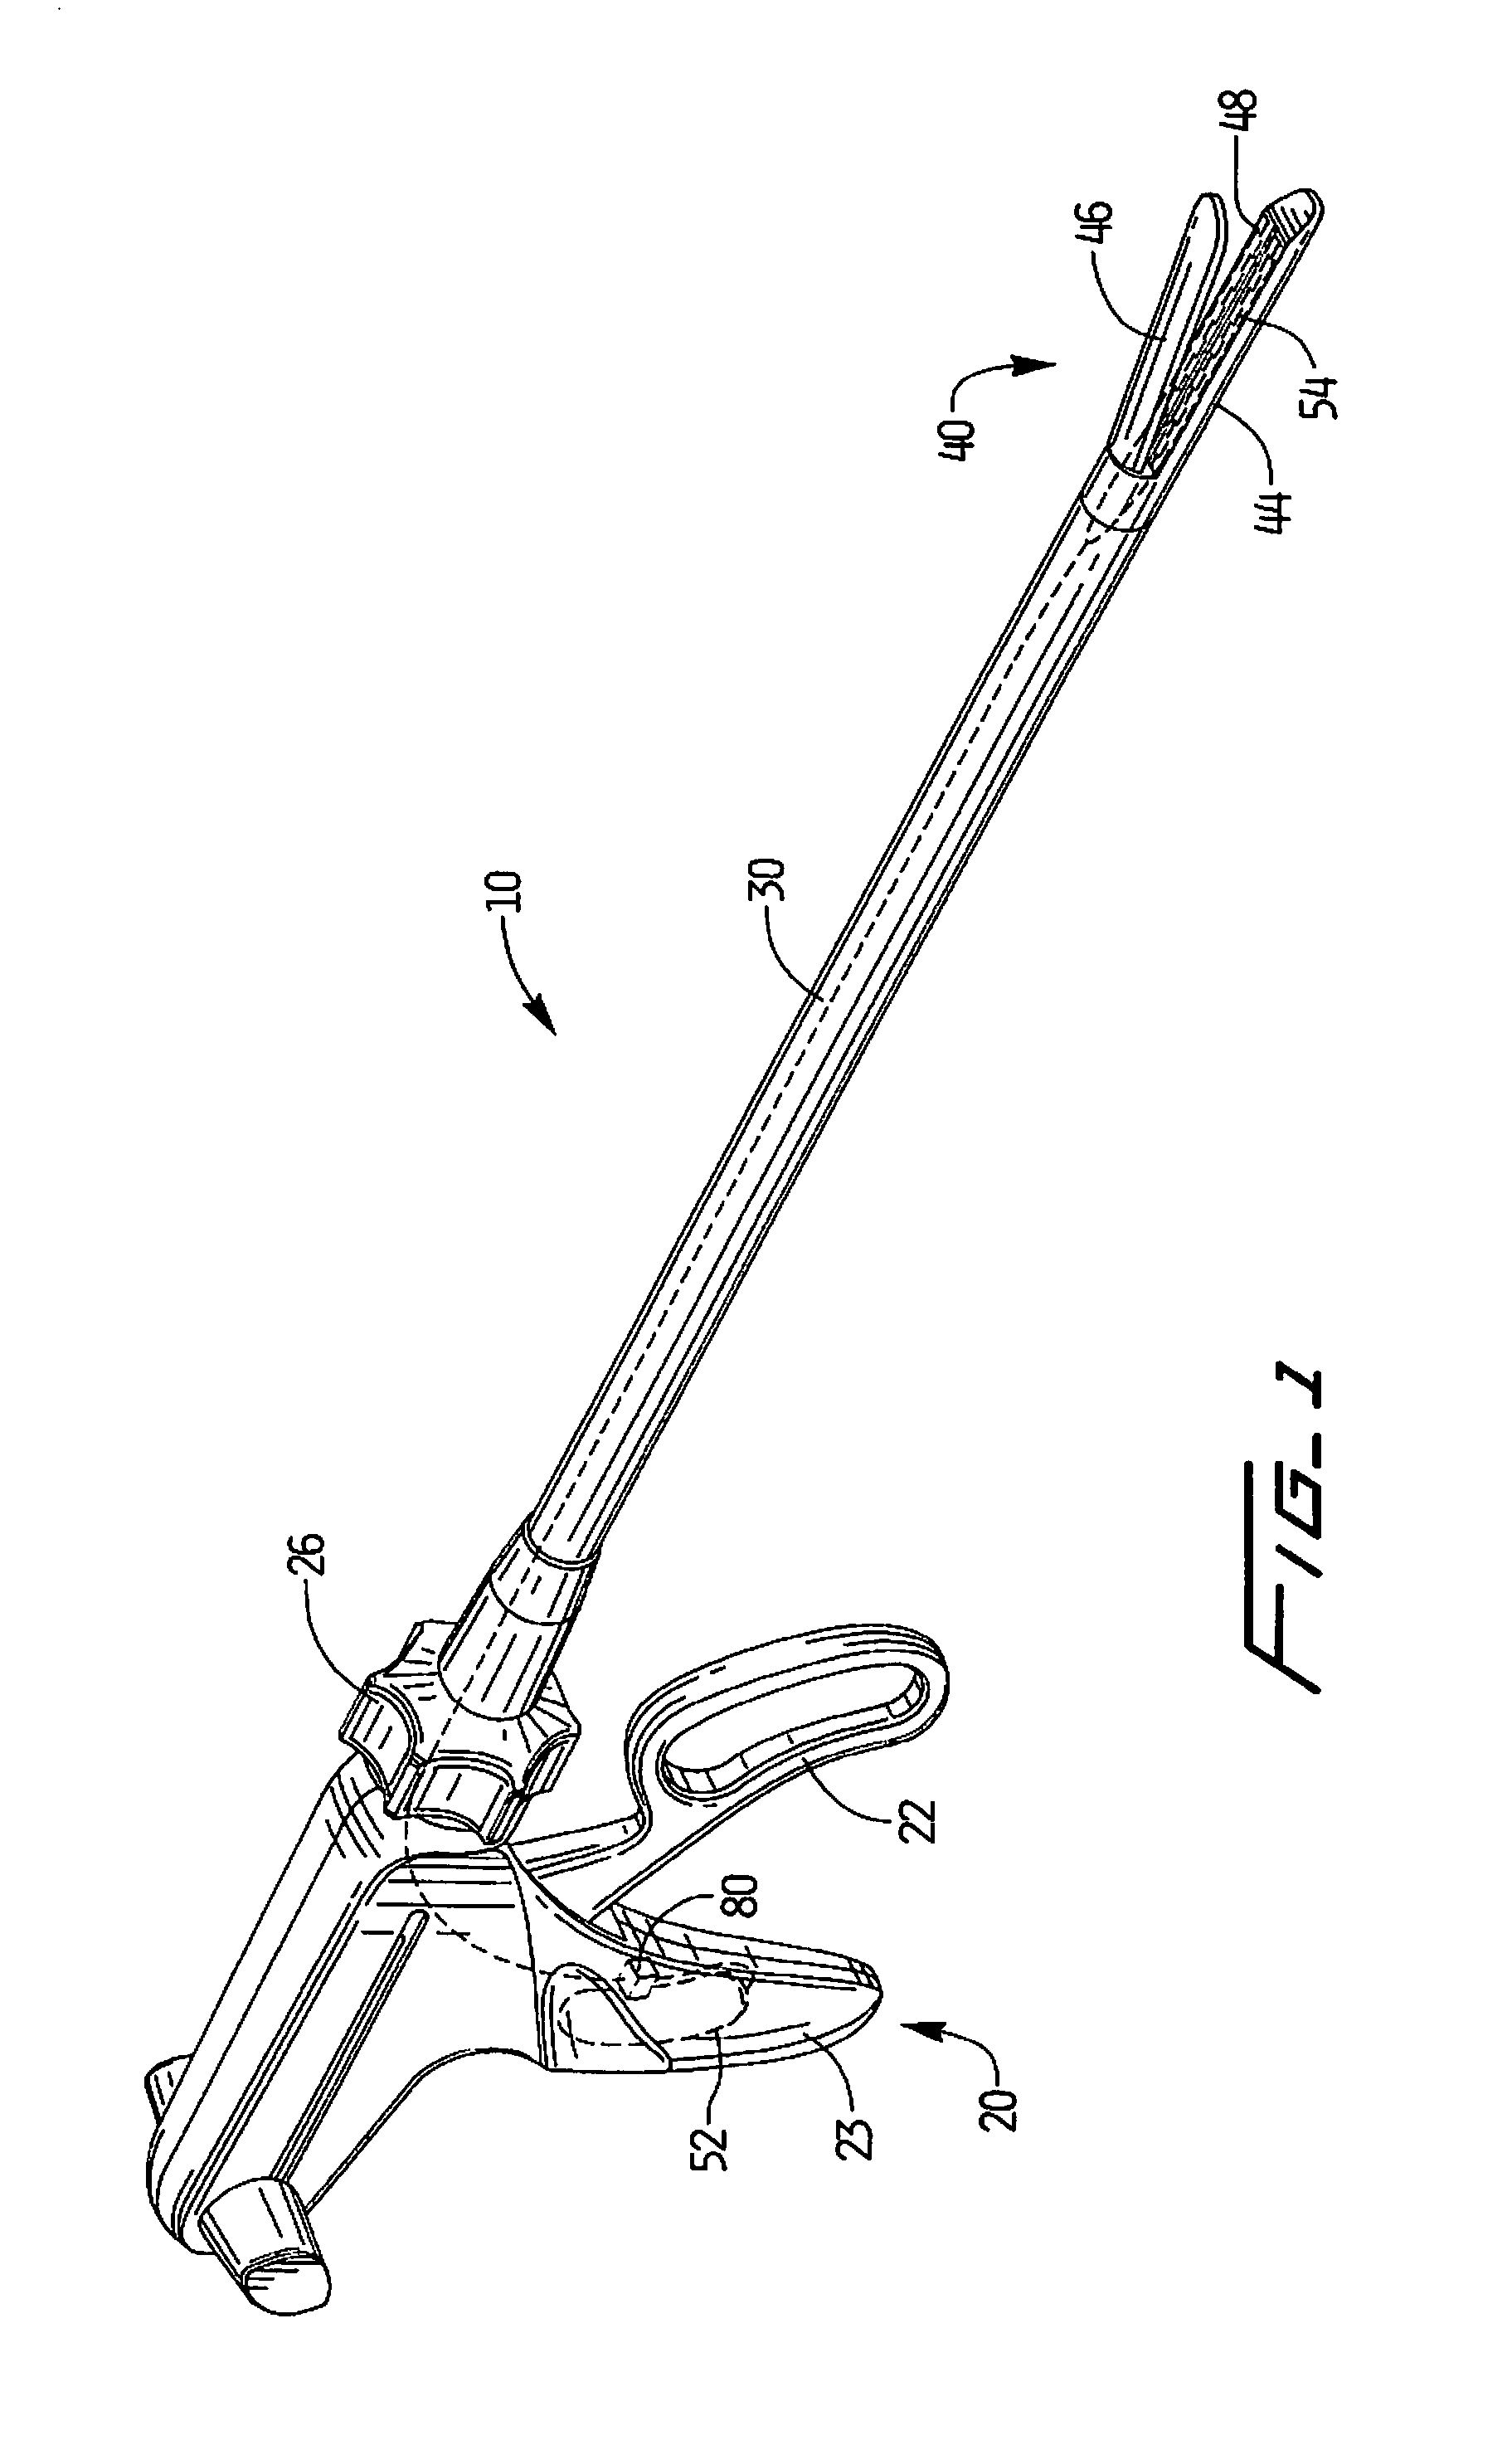 Surgical stapler with tactile feedback system